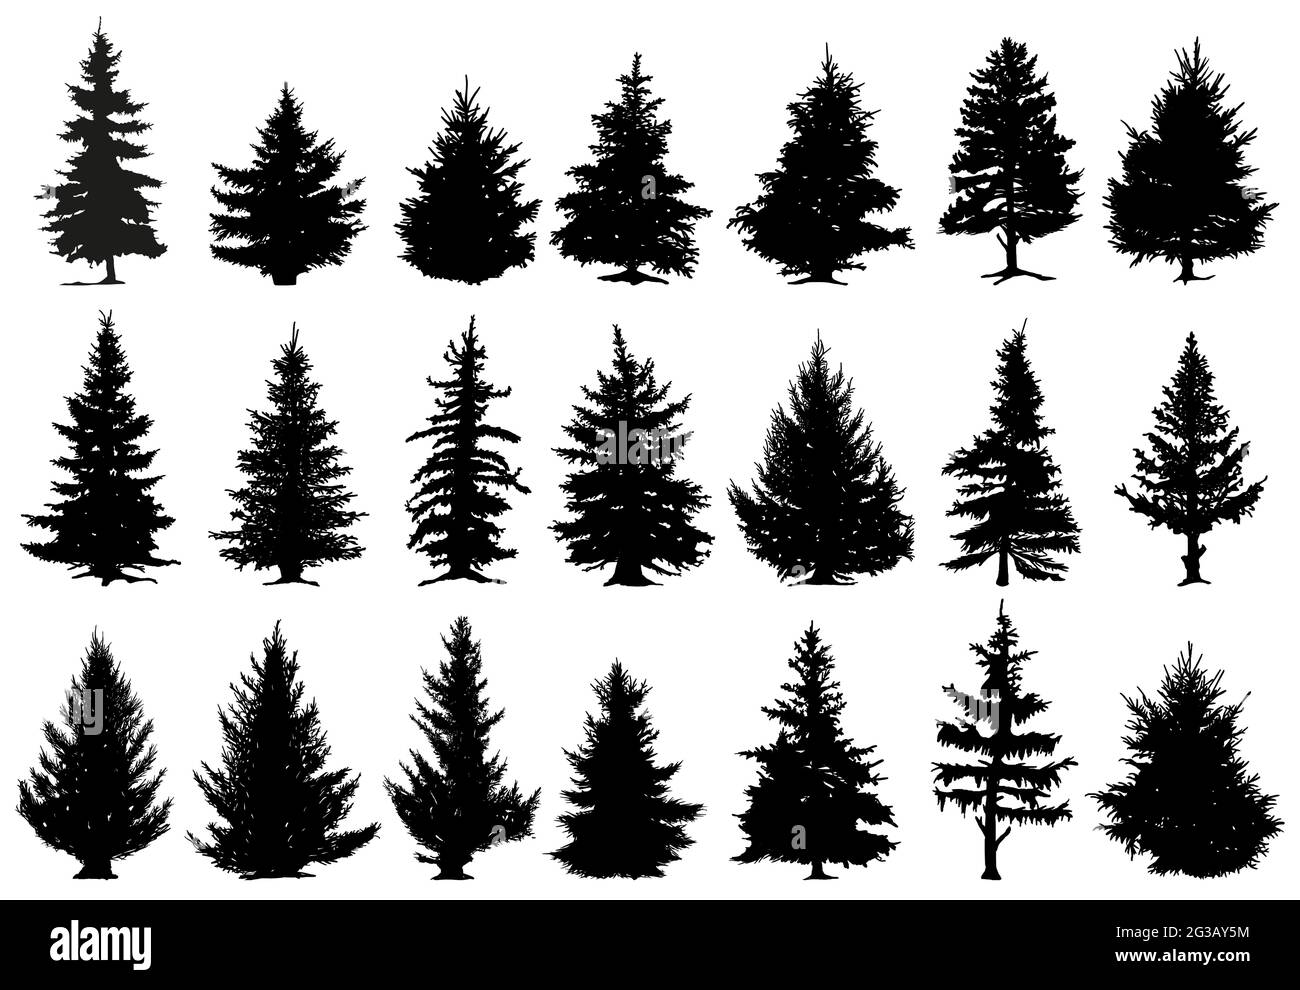 Set of evergreen branches pine tree fir spruce Vector Image